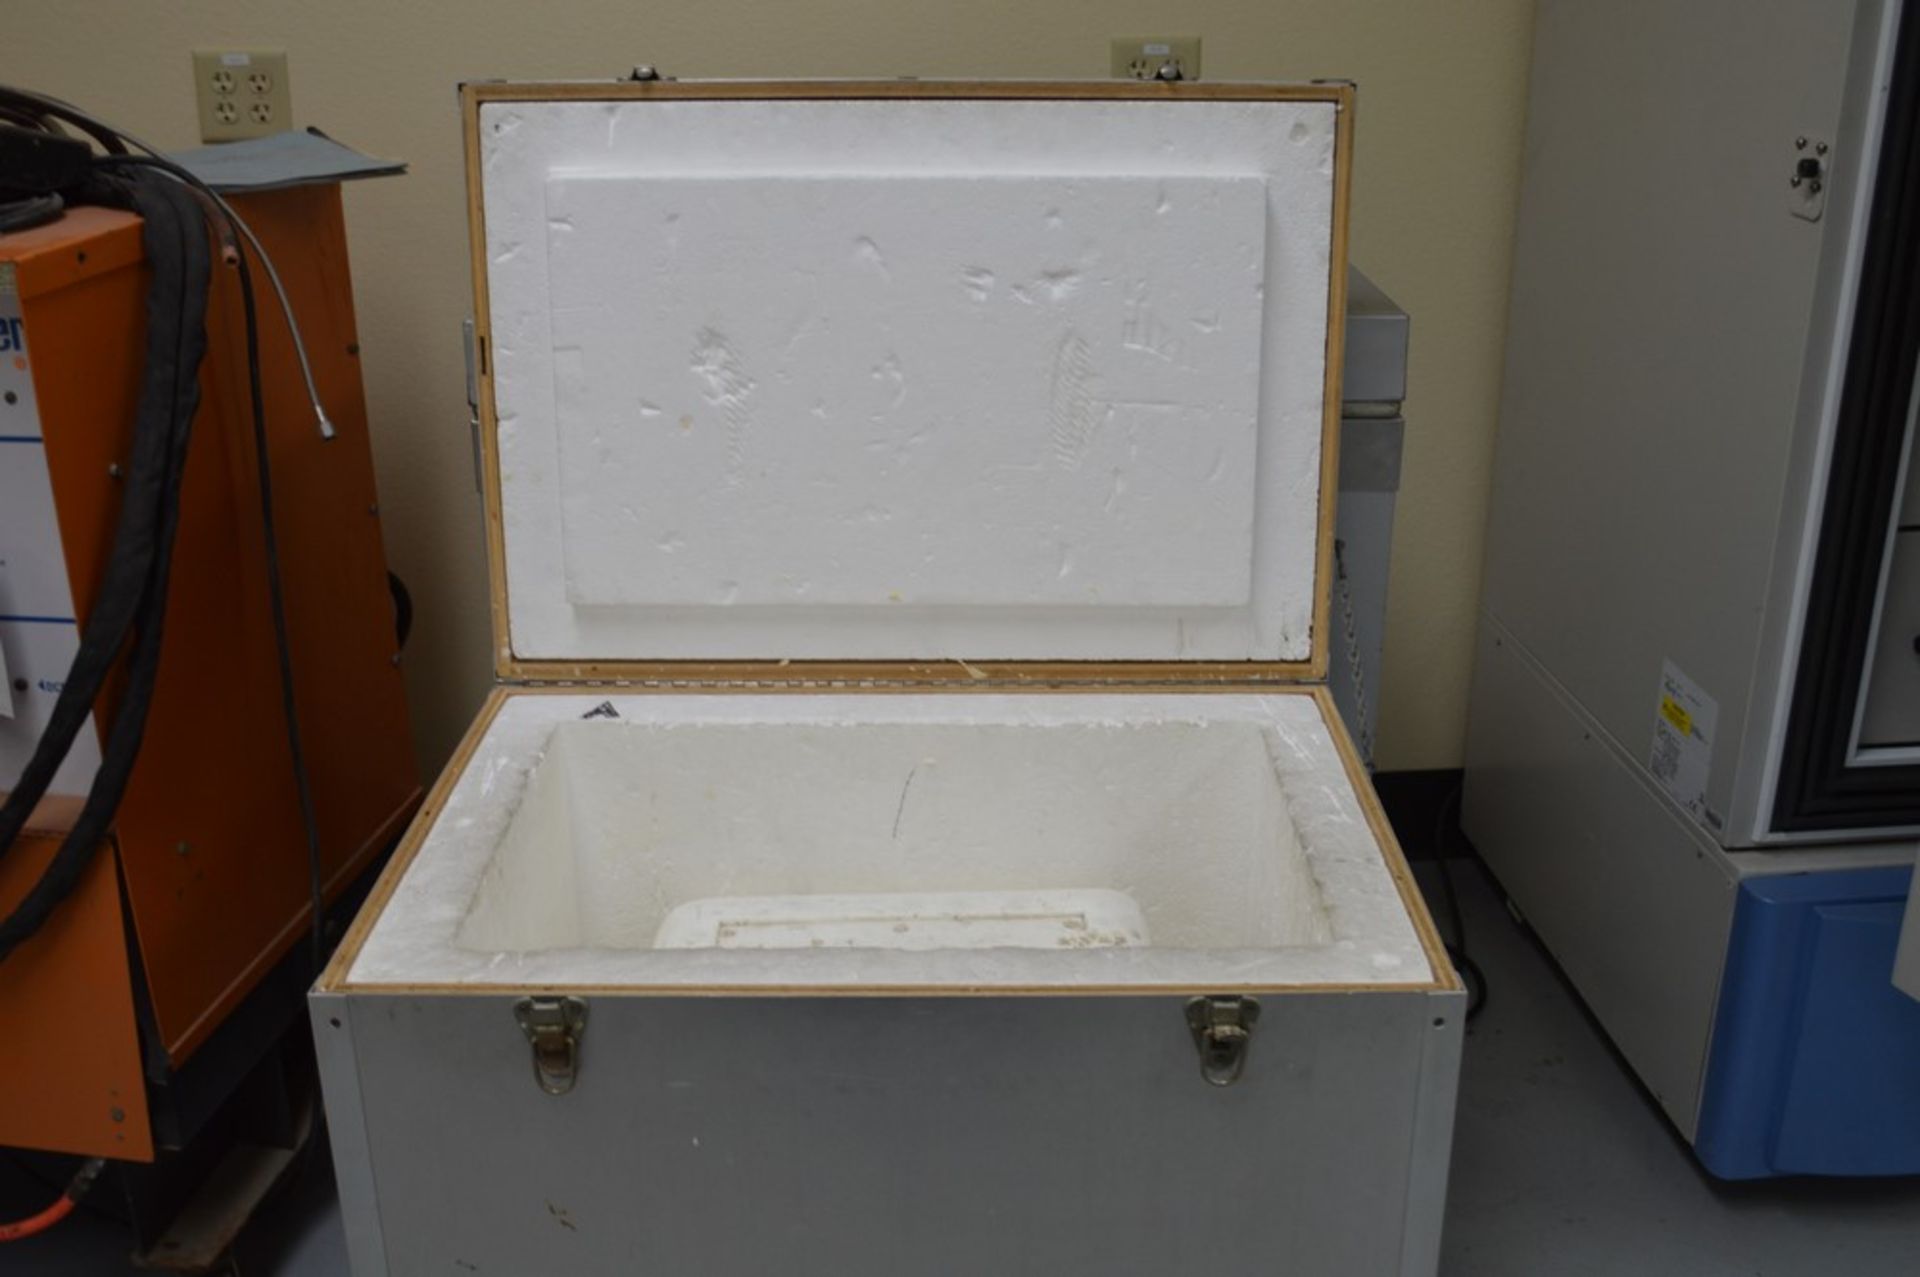 VTL-500 Dry Ice Deep Freezer, internal tub 16 1/2 x 26 1/4" x 19 1/2" deep with extra metal jacketed - Image 5 of 5